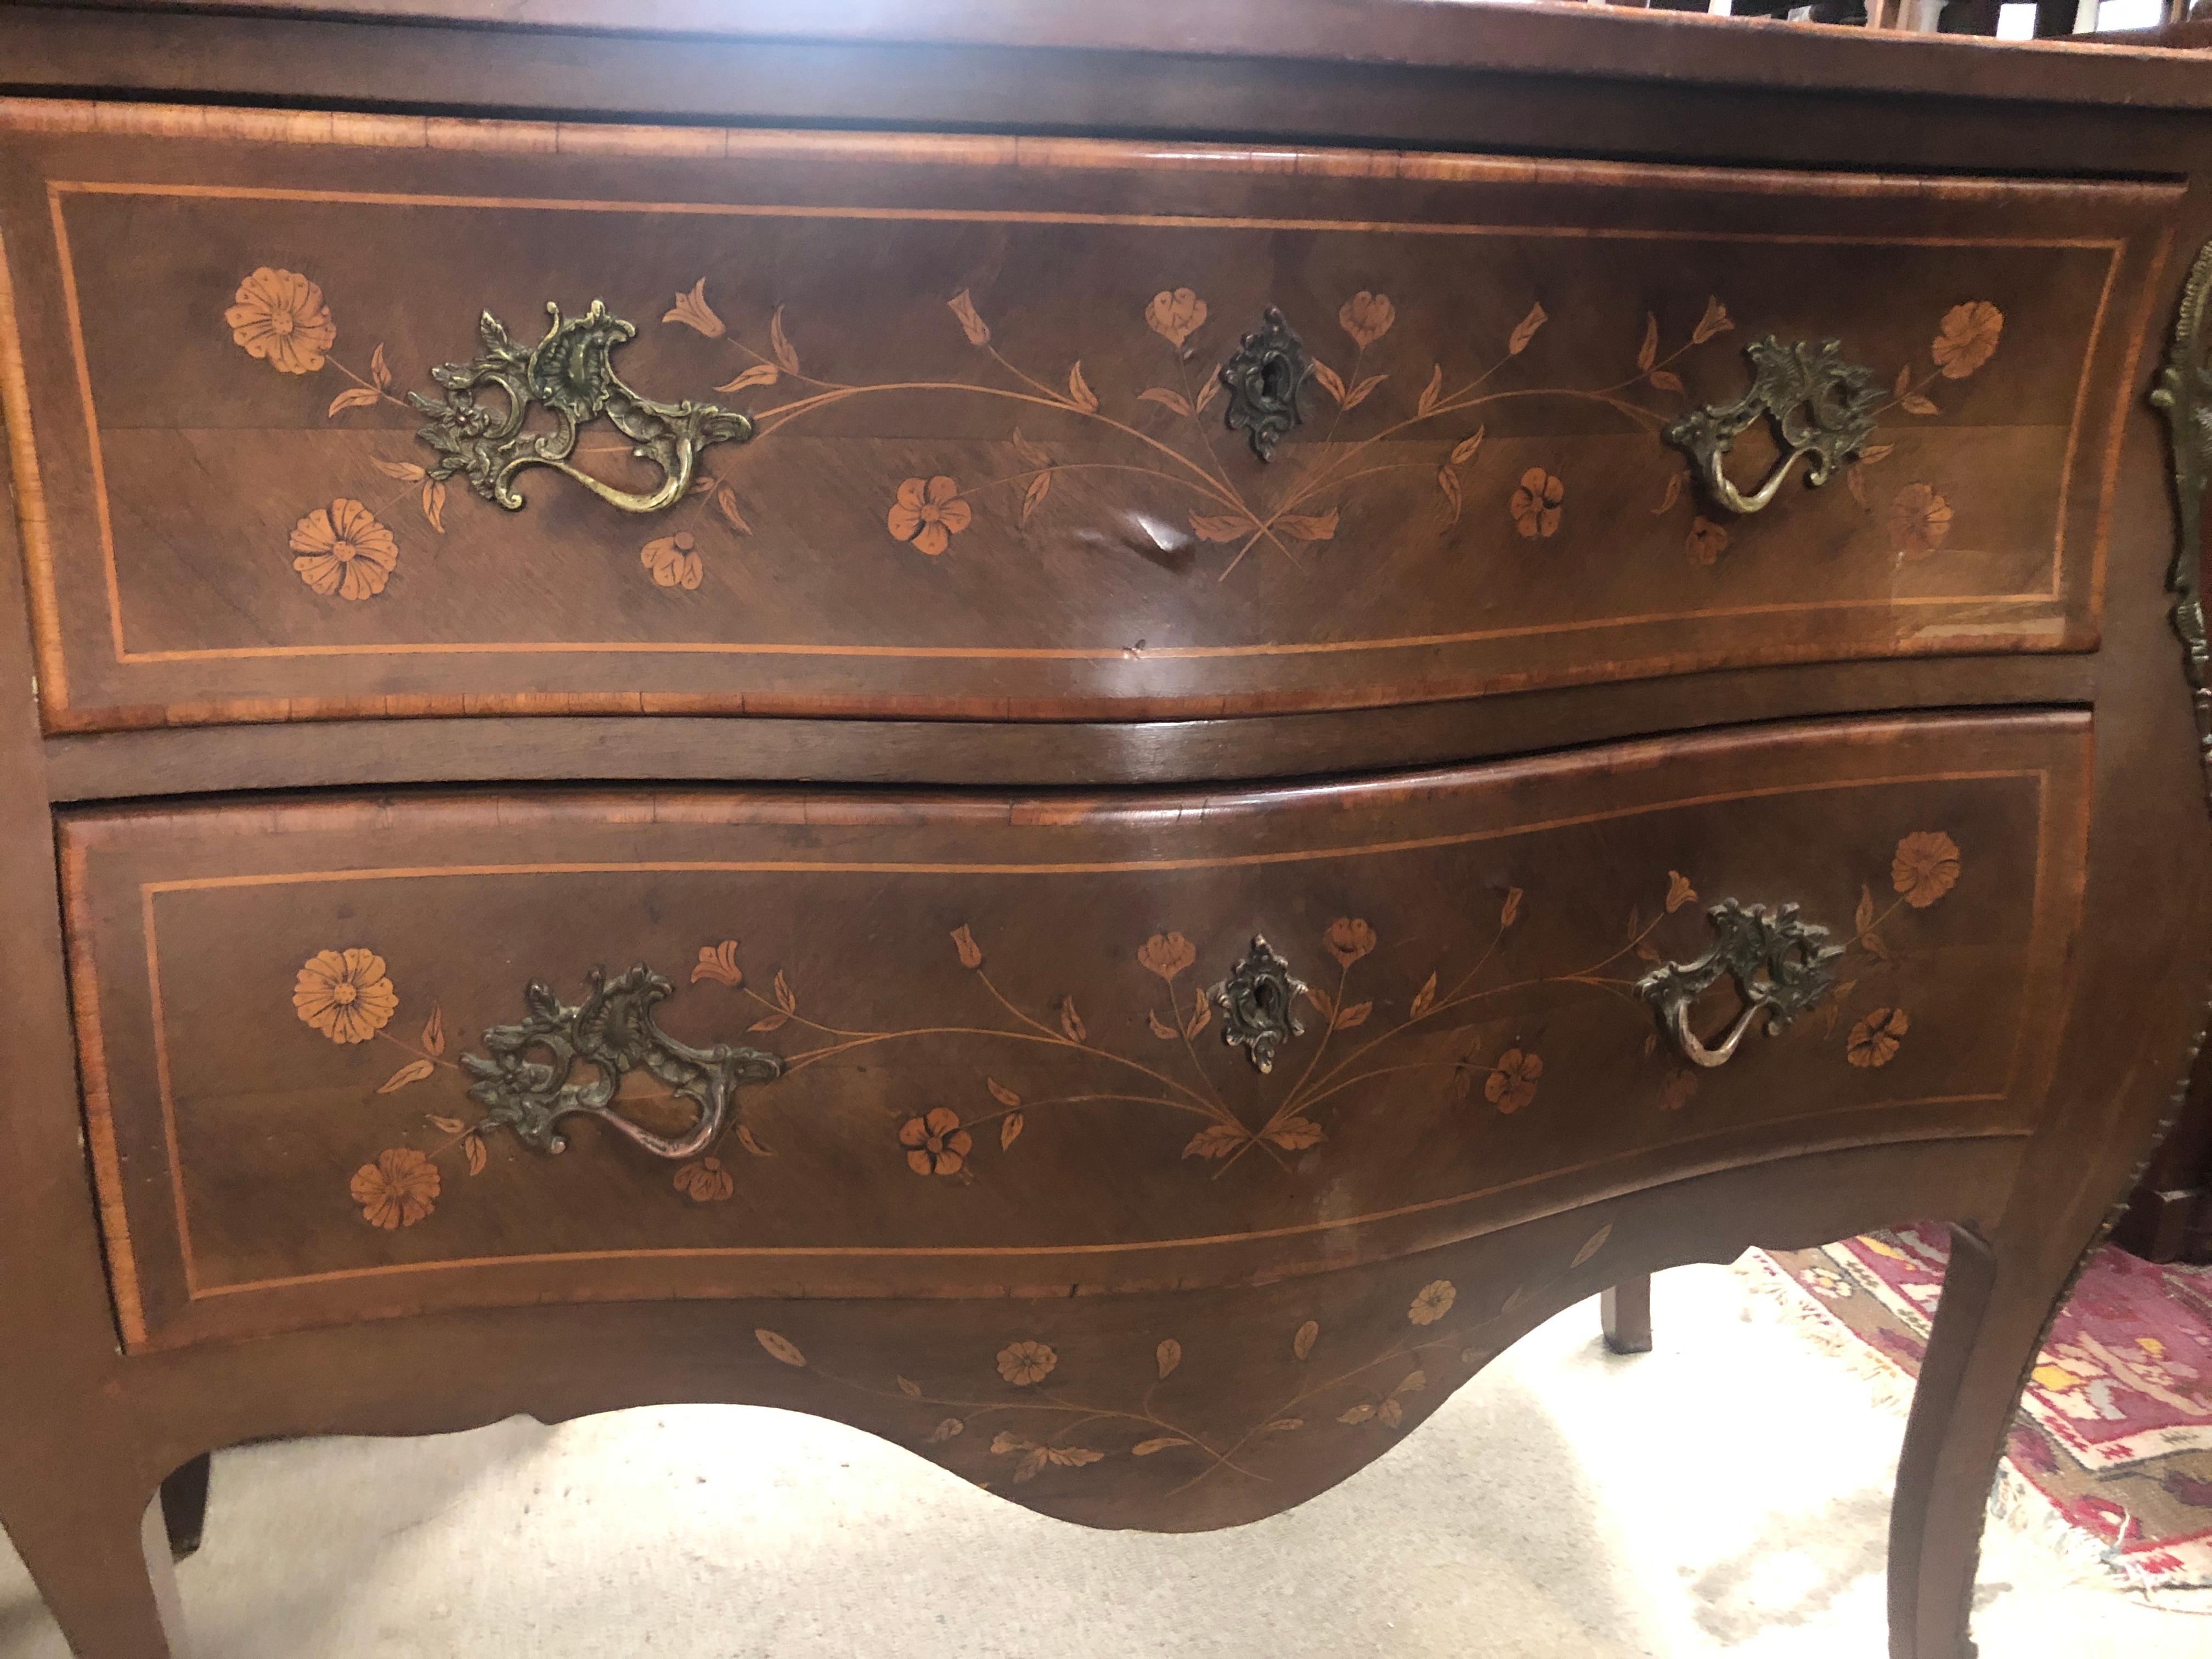 Beautiful French commode, late 19th century, in mahogany and inlaid in boxwood. Some small defections on the sides, in good condition the wooden structure. To be restored.
Imagine it restored and you will immediately find a place for this fantastic